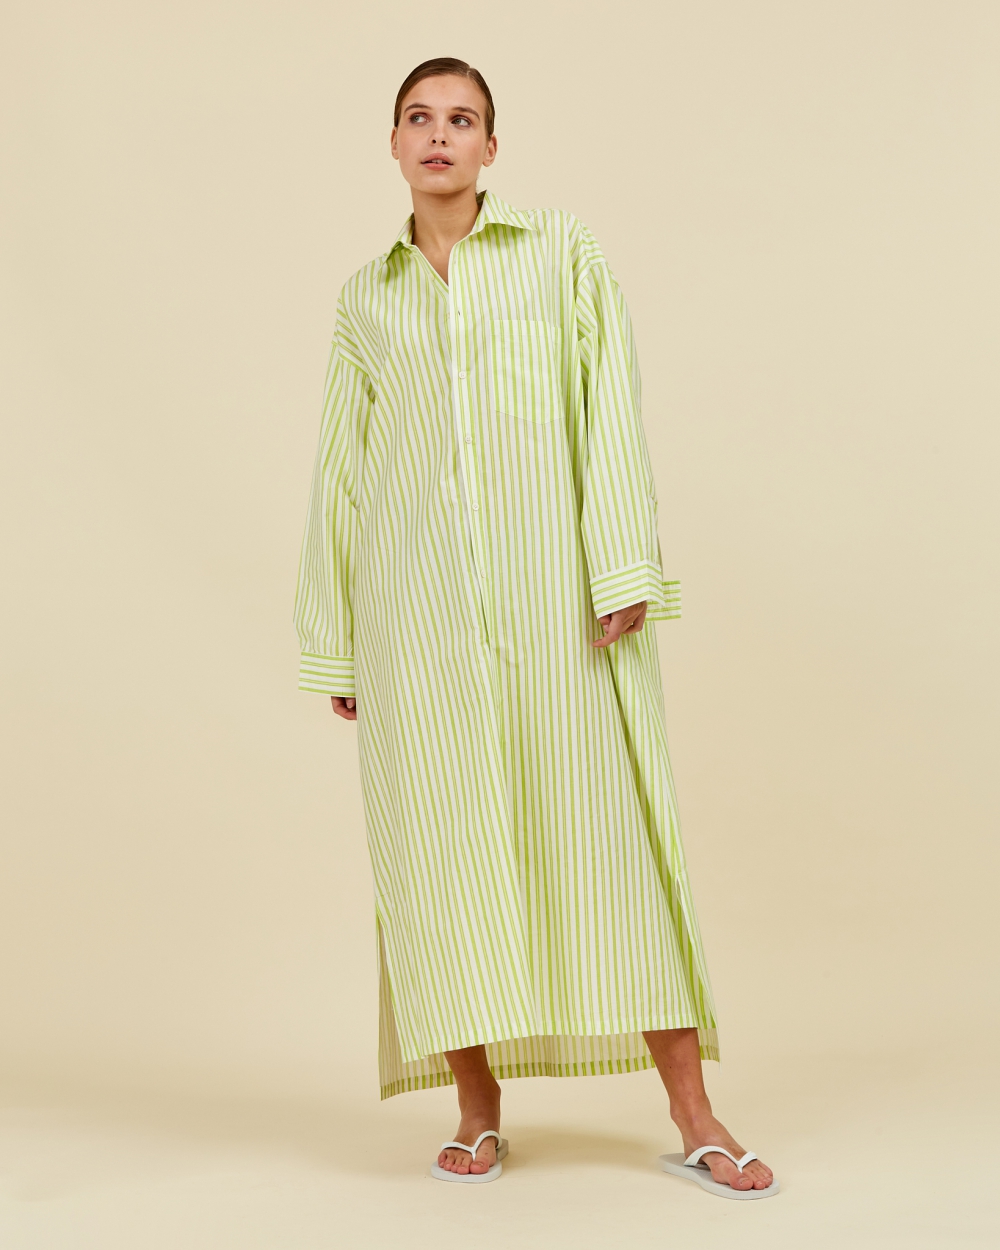 https://www.seamehappy.be/wp-content/uploads/2023/01/Sea-Me-Happy-Geenah-shirt-dress-stripes-lime-front1.jpg